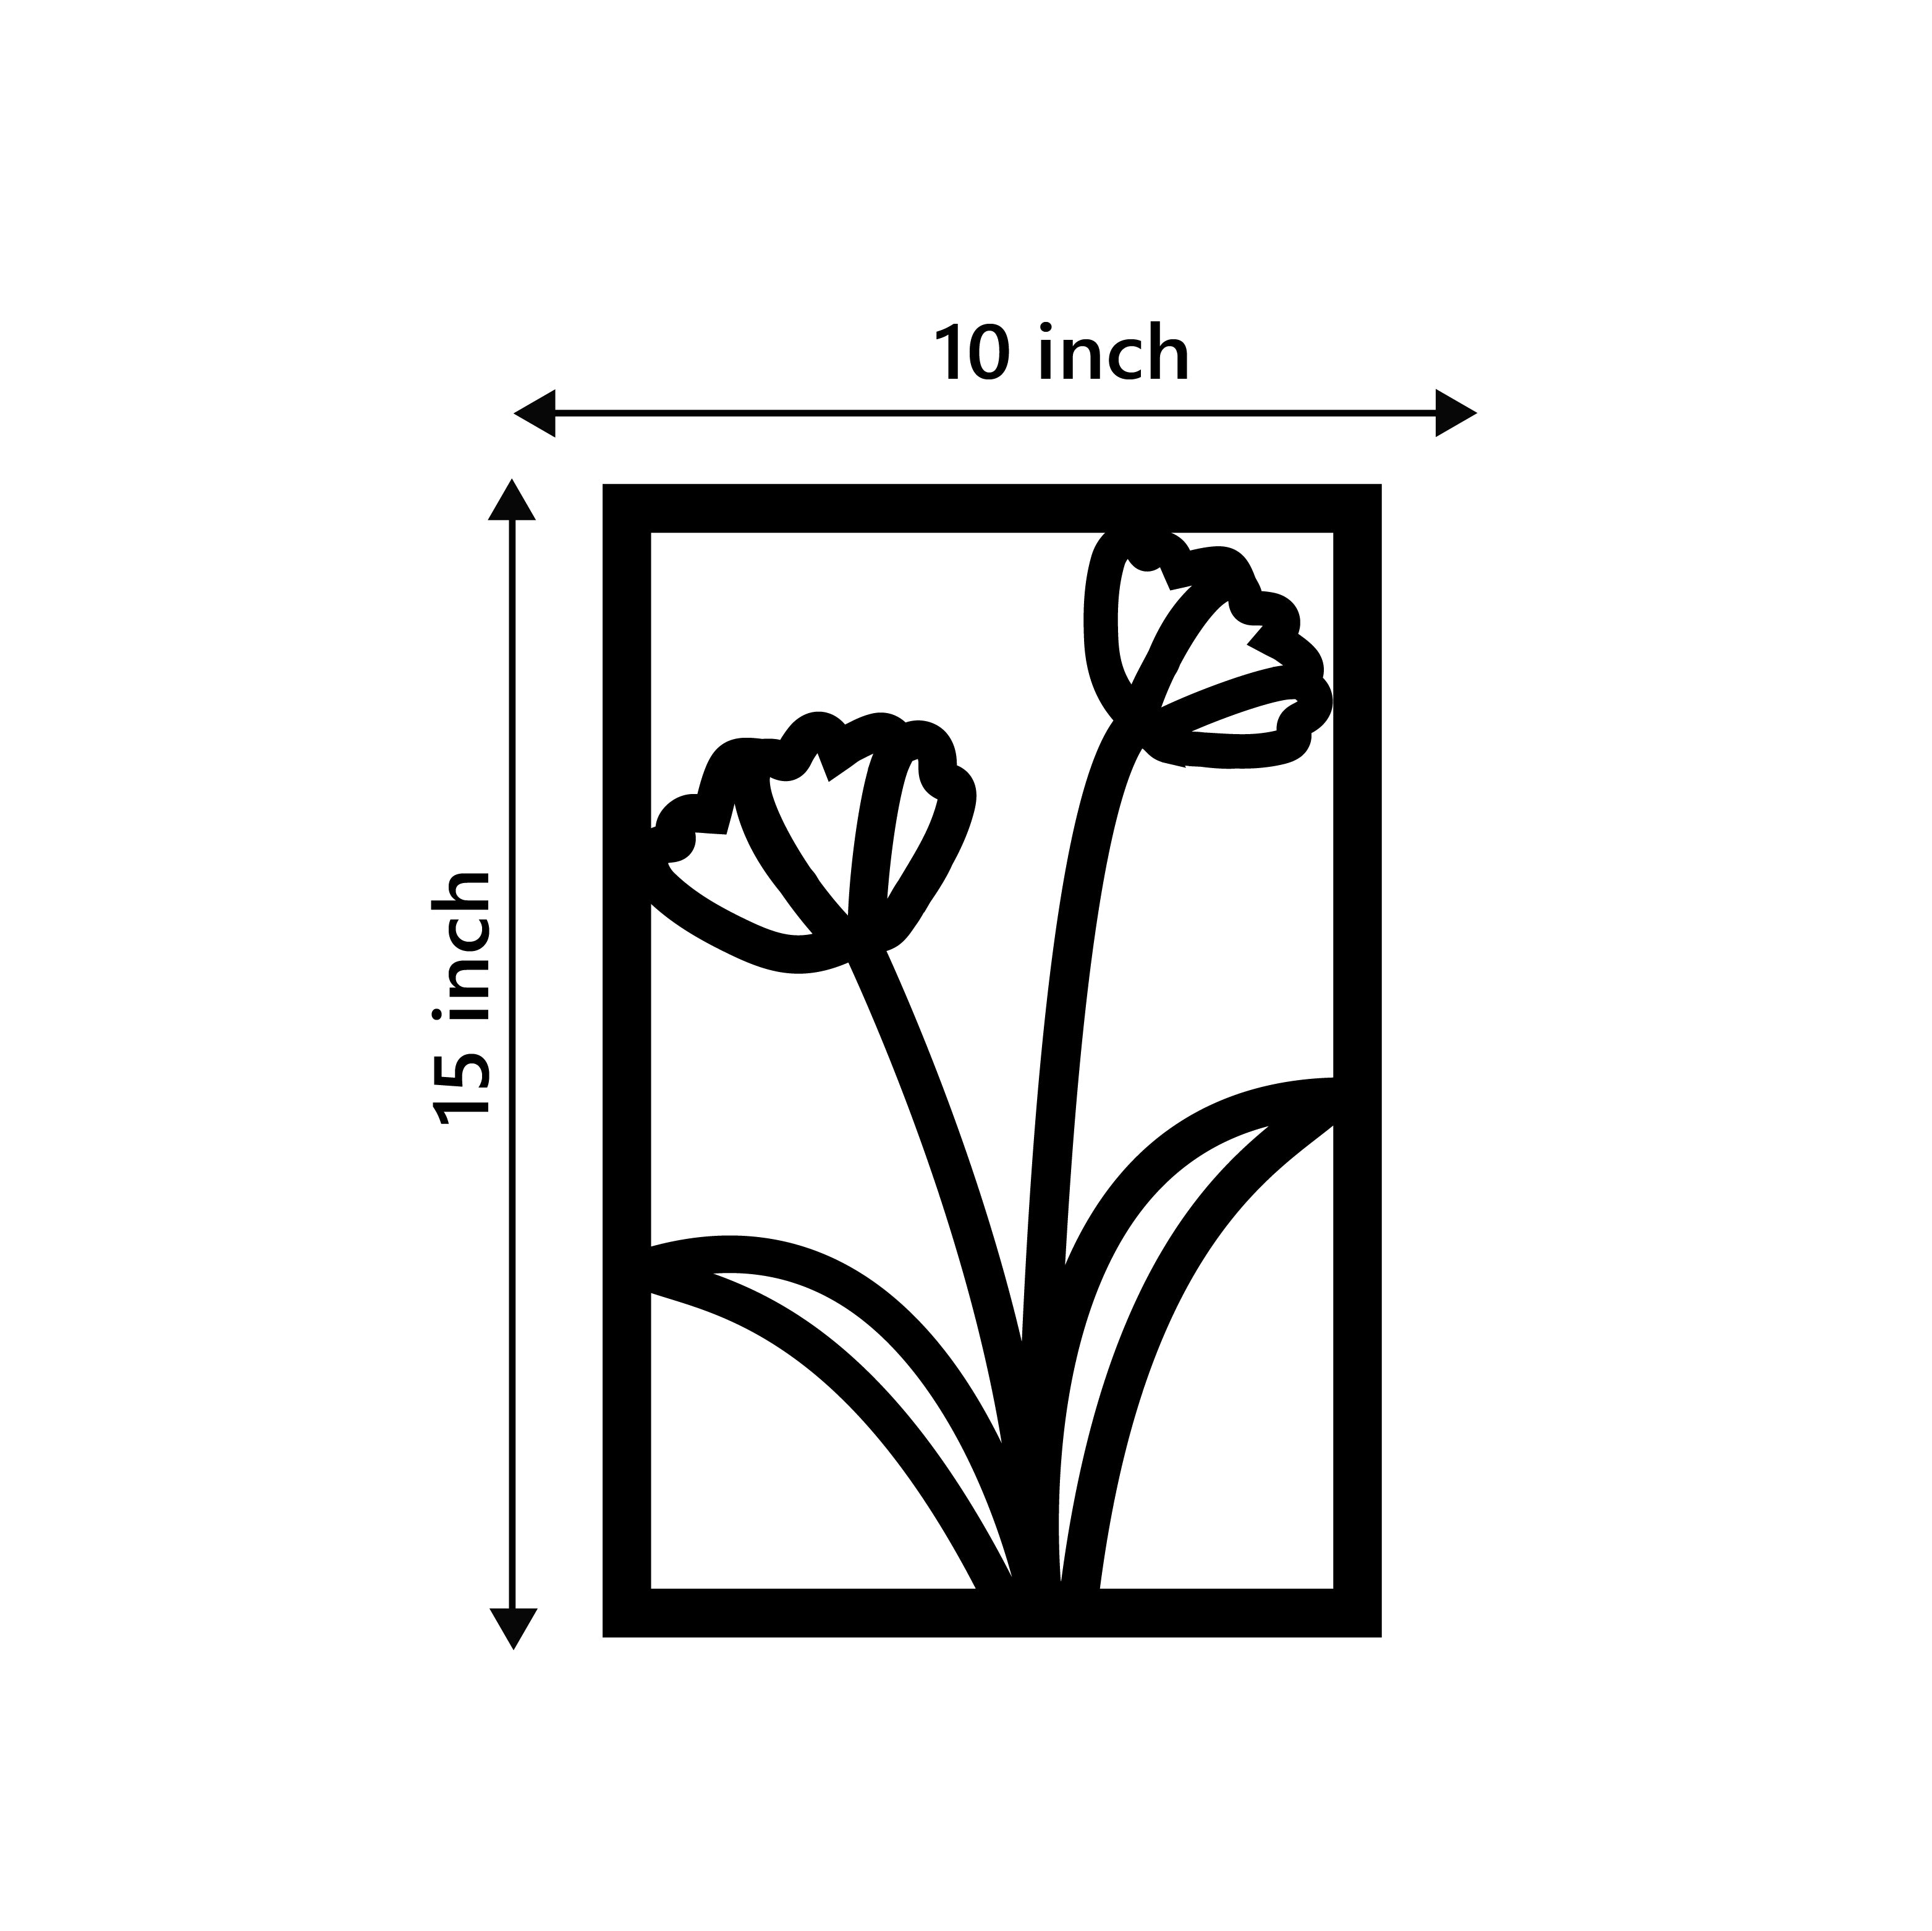 "Flower frame" Black Engineered Wood Wall Art Cutout, Ready to Hang Home Decor 3